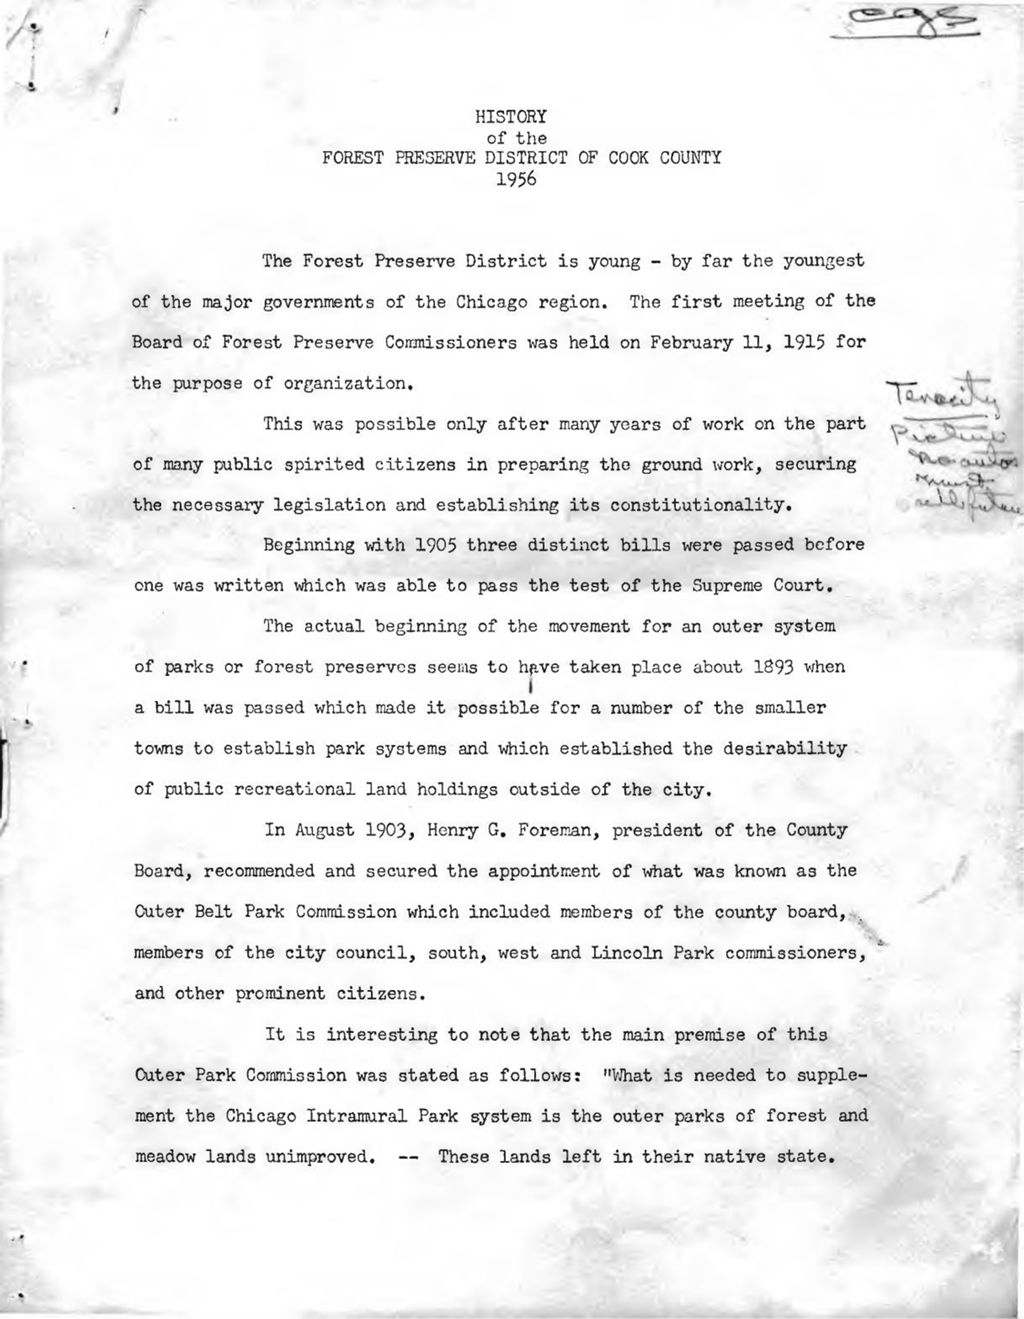 Miscellaneous, policies, histories, and encroachment, 1956